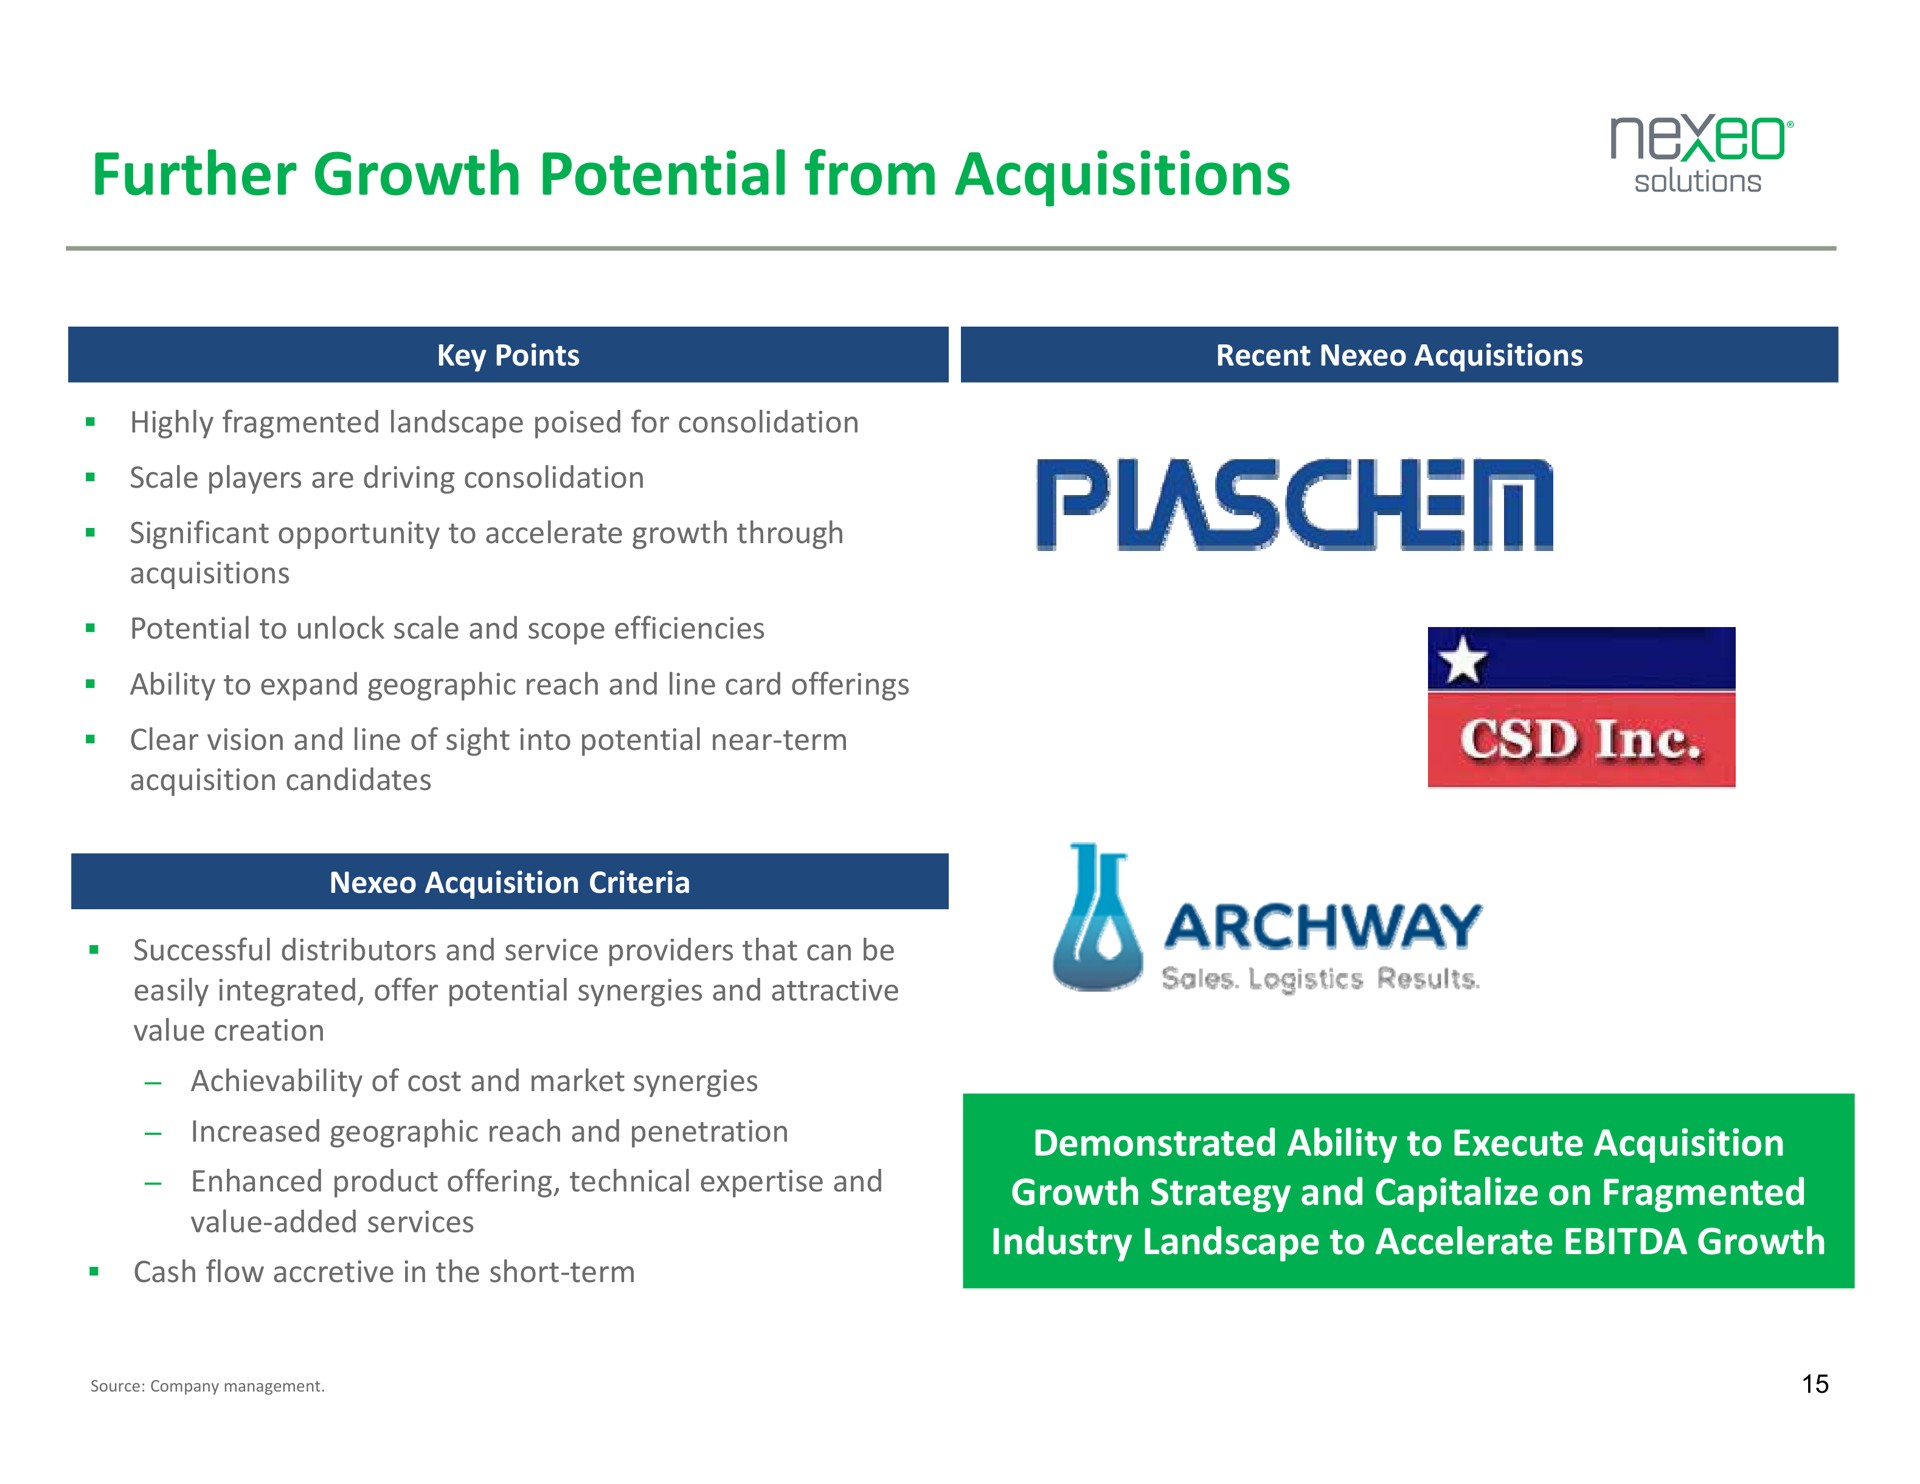 further growth potential from acquisitions solutions increased geographic reach and penetration archway demonstrated ability to execute acquisition | Nexeo